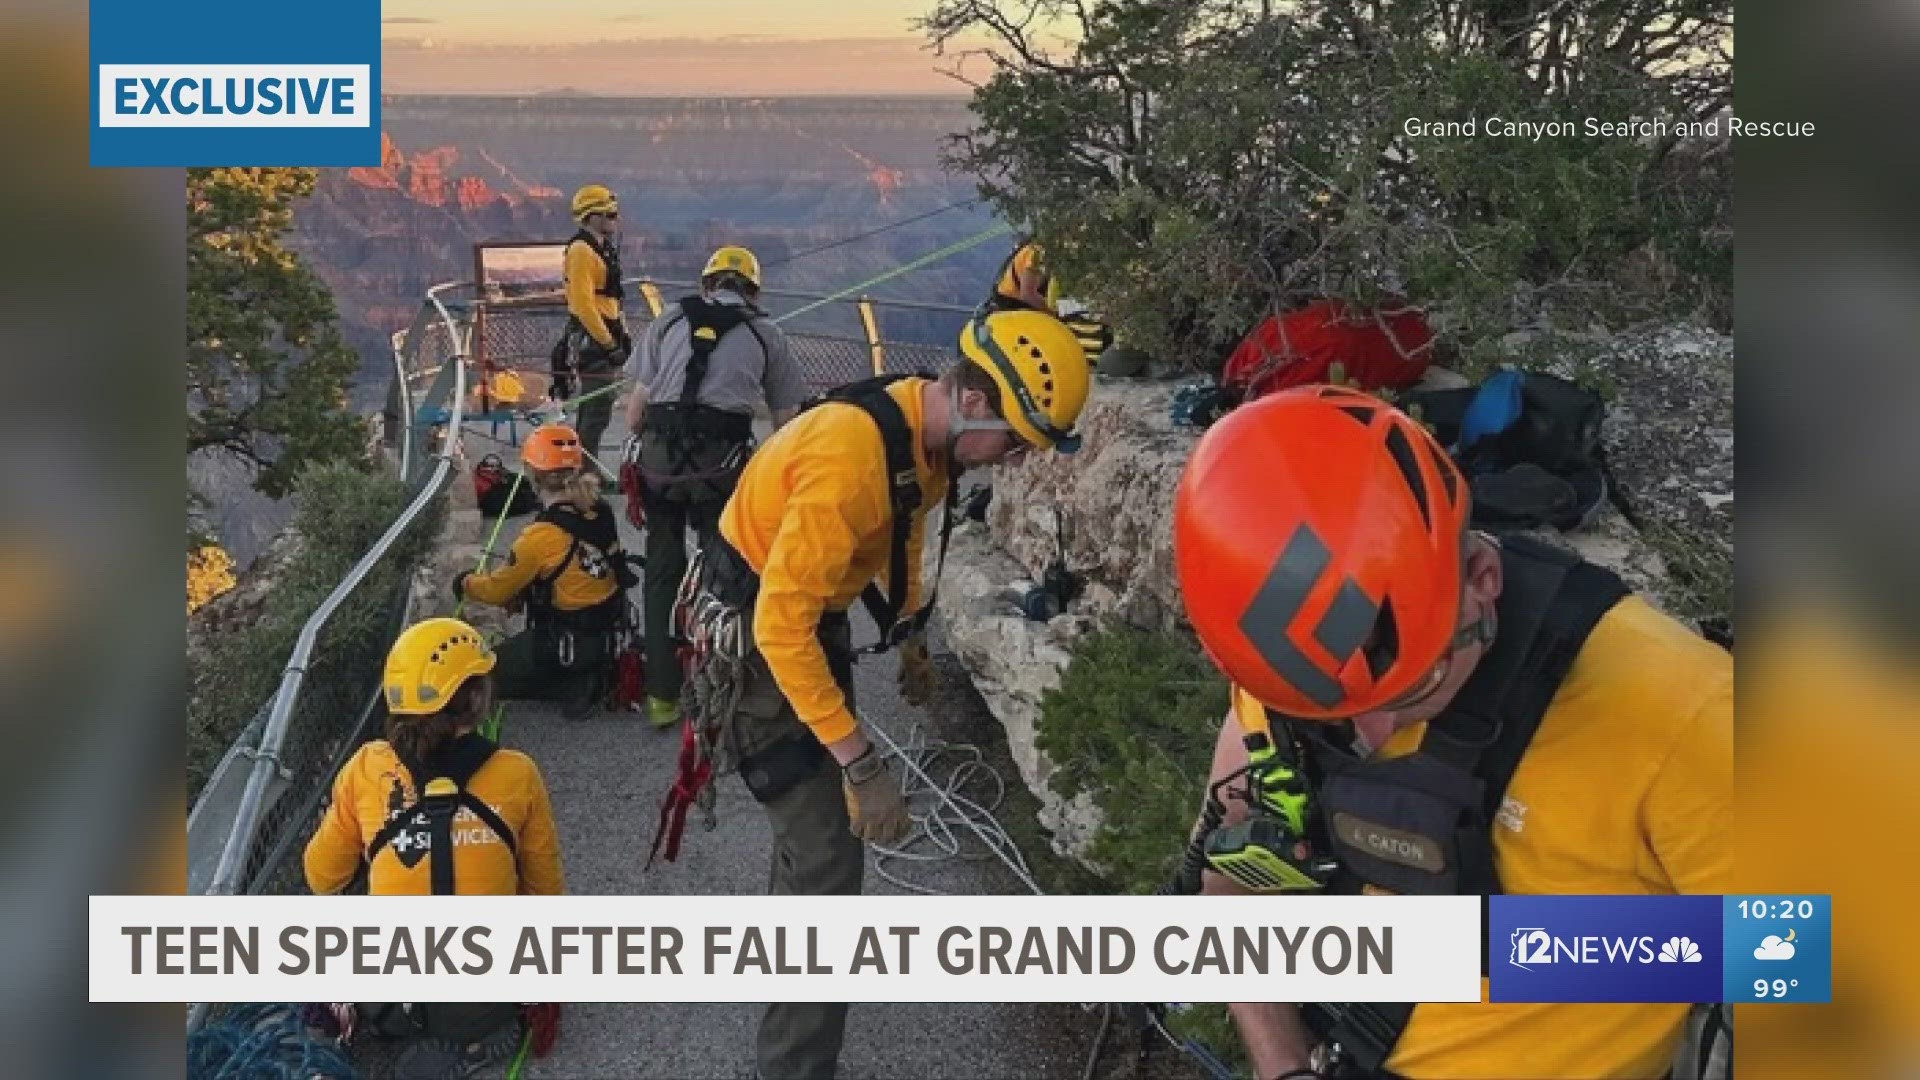 A North Dakota teen who fell from a cliff at the Grand Canyon earlier this week  is sharing his story of surviving the nearly 100-foot fall.